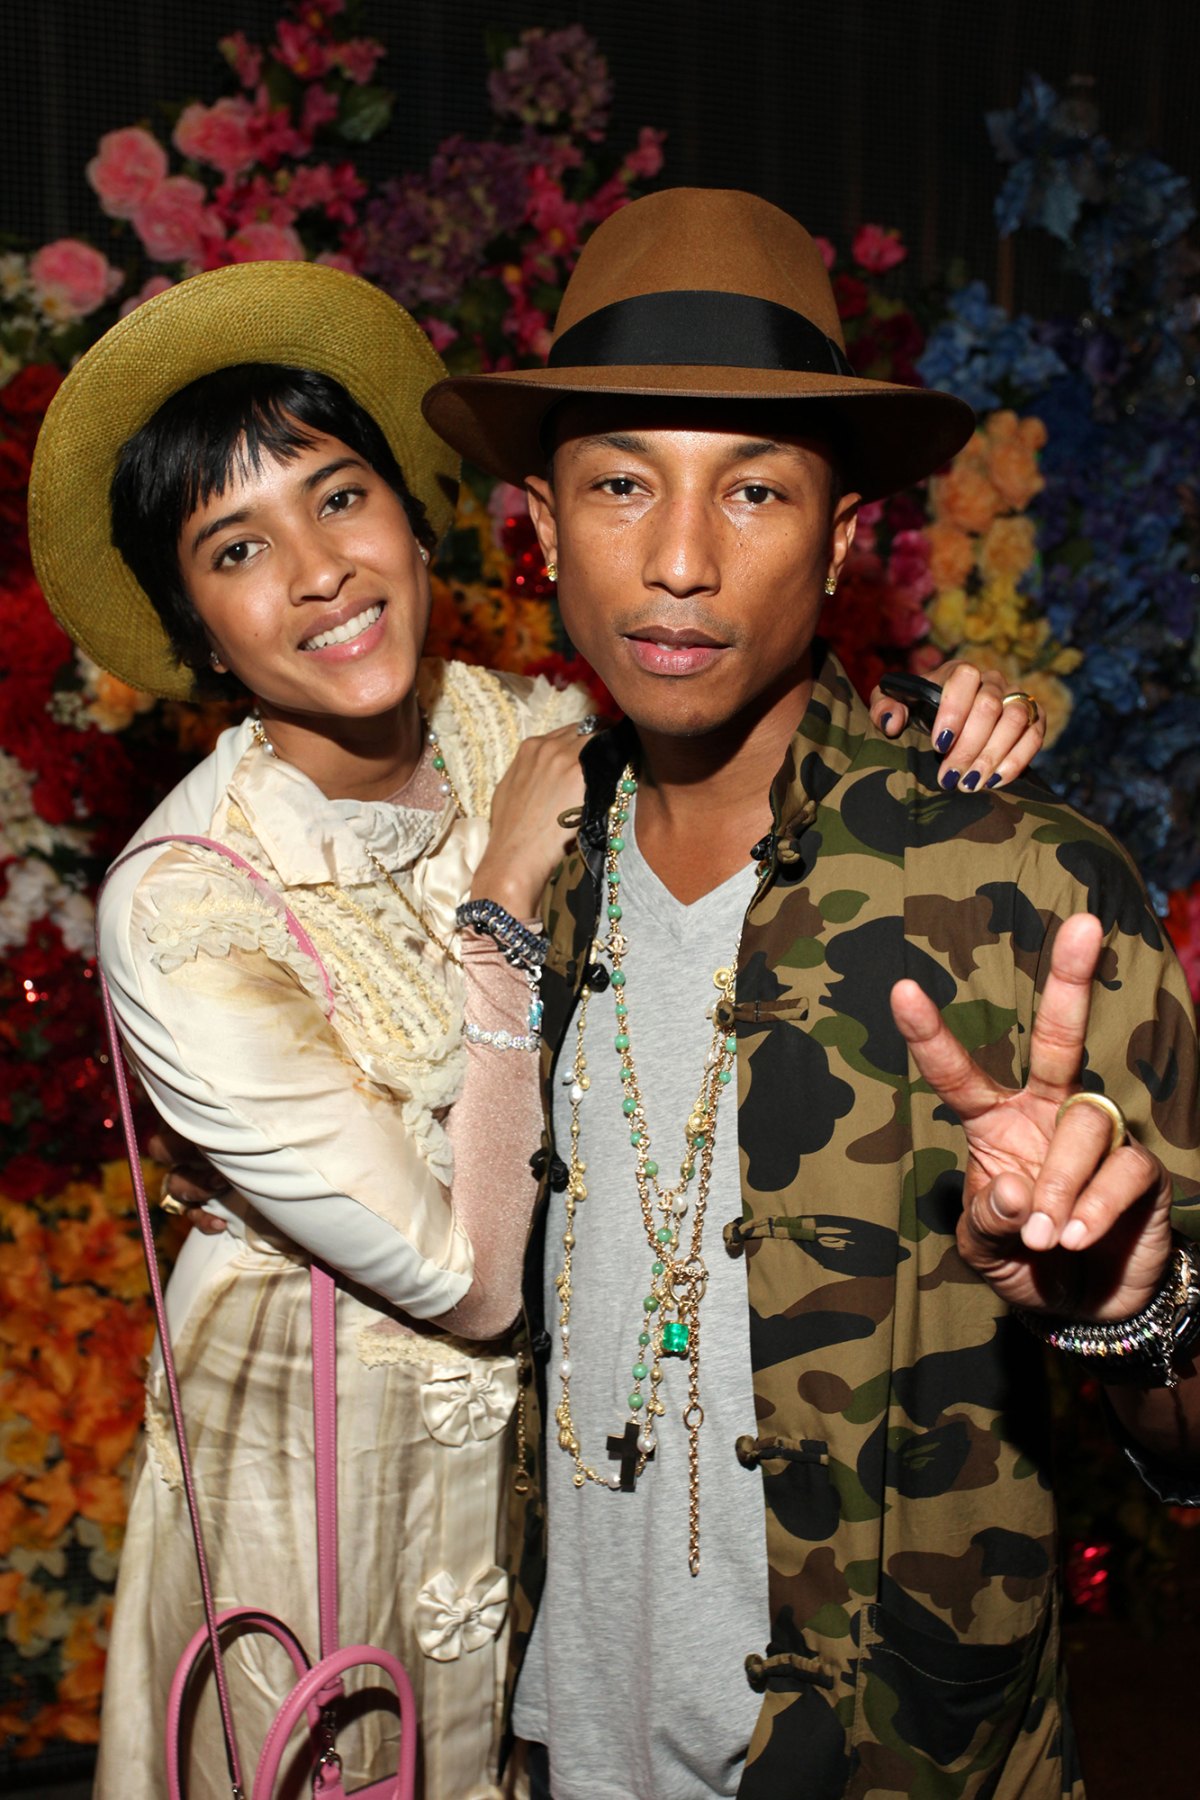 Who Is Pharrell Williams' Wife? All About Helen Lasichanh